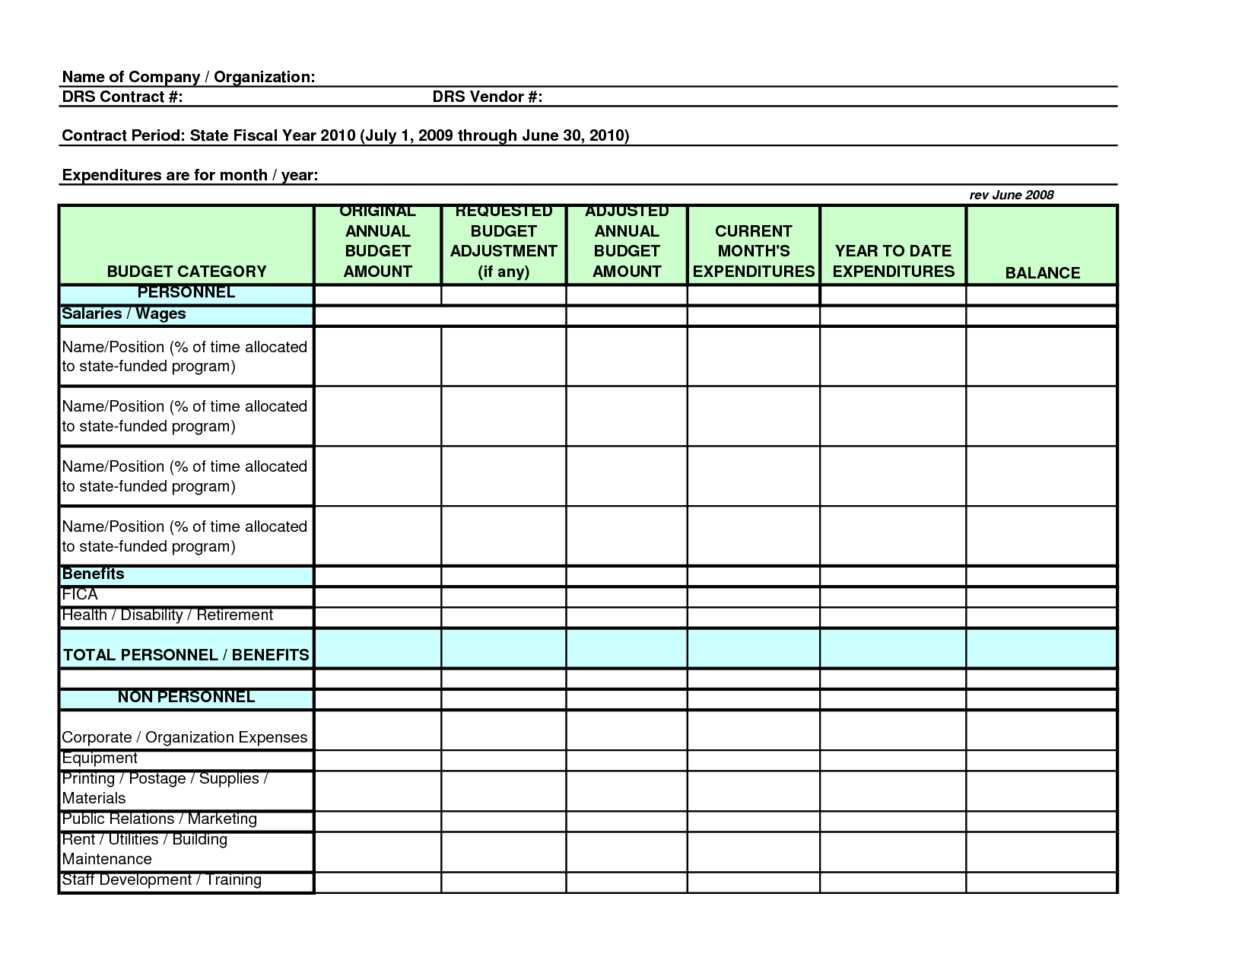 Business Expense Categories Spreadsheet As Excel Spreadsheet With Business Expense Categories Spreadsheet